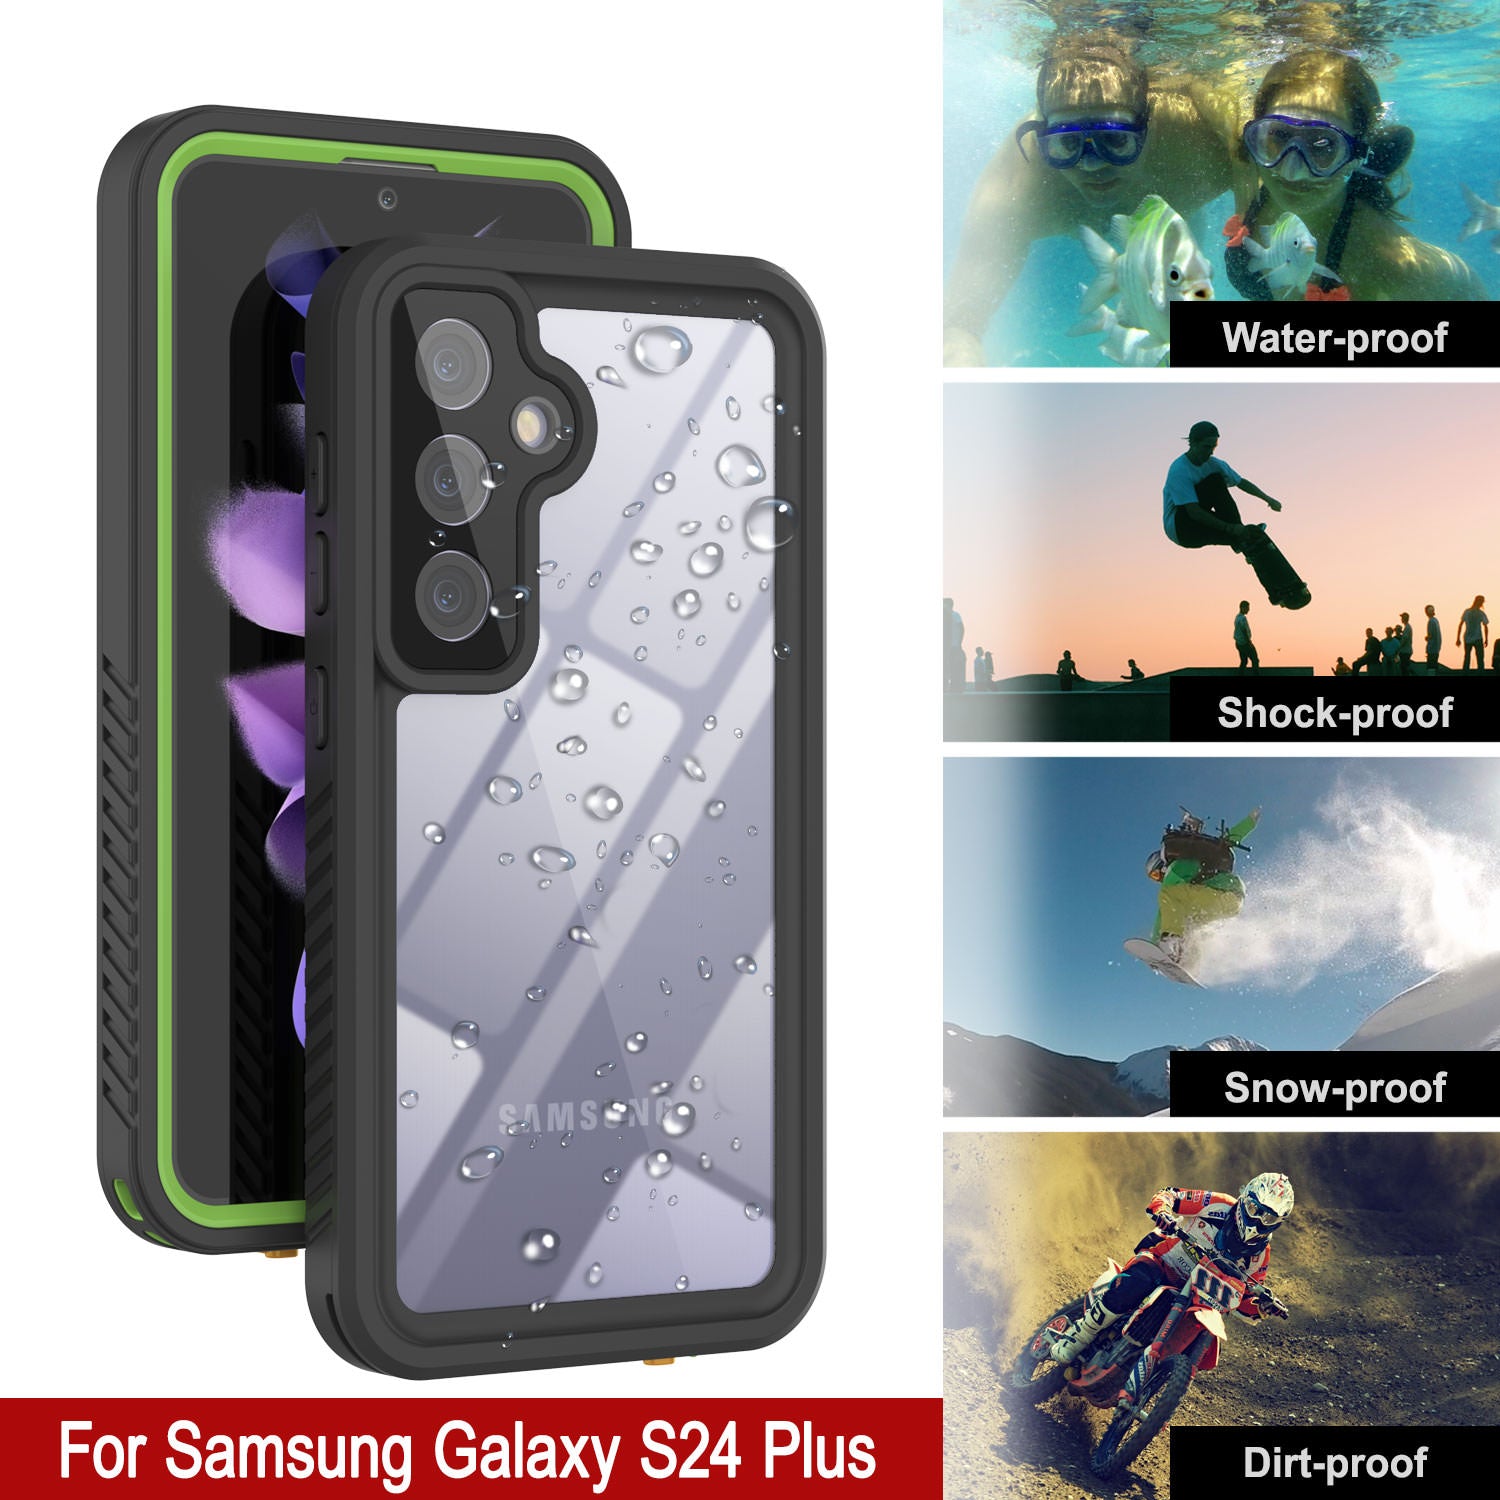 Galaxy S24 Ultra Water/ Shockproof [Extreme Series] Screen Protector C –  punkcase